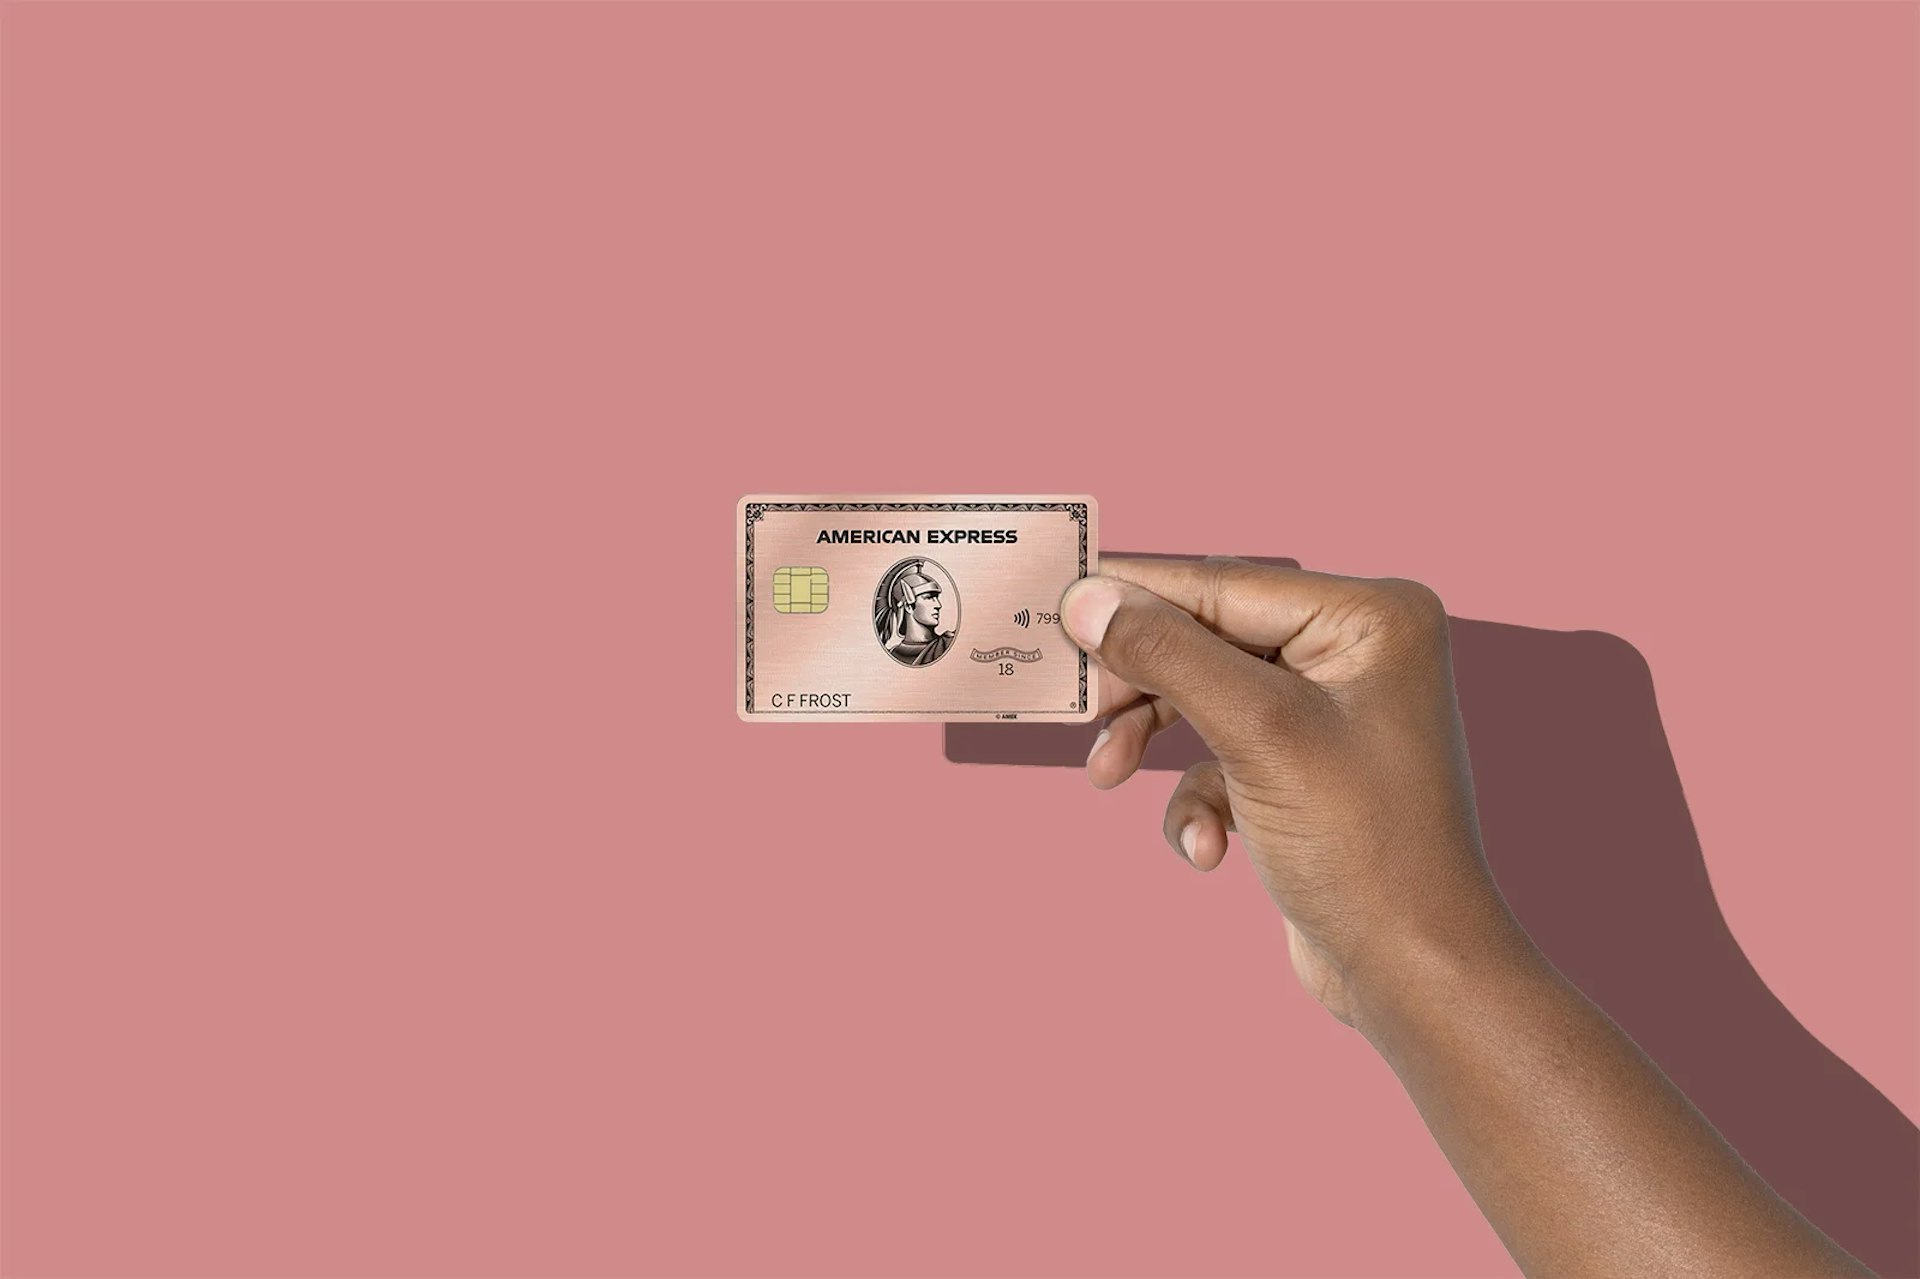 The Rose Gold American Express Card